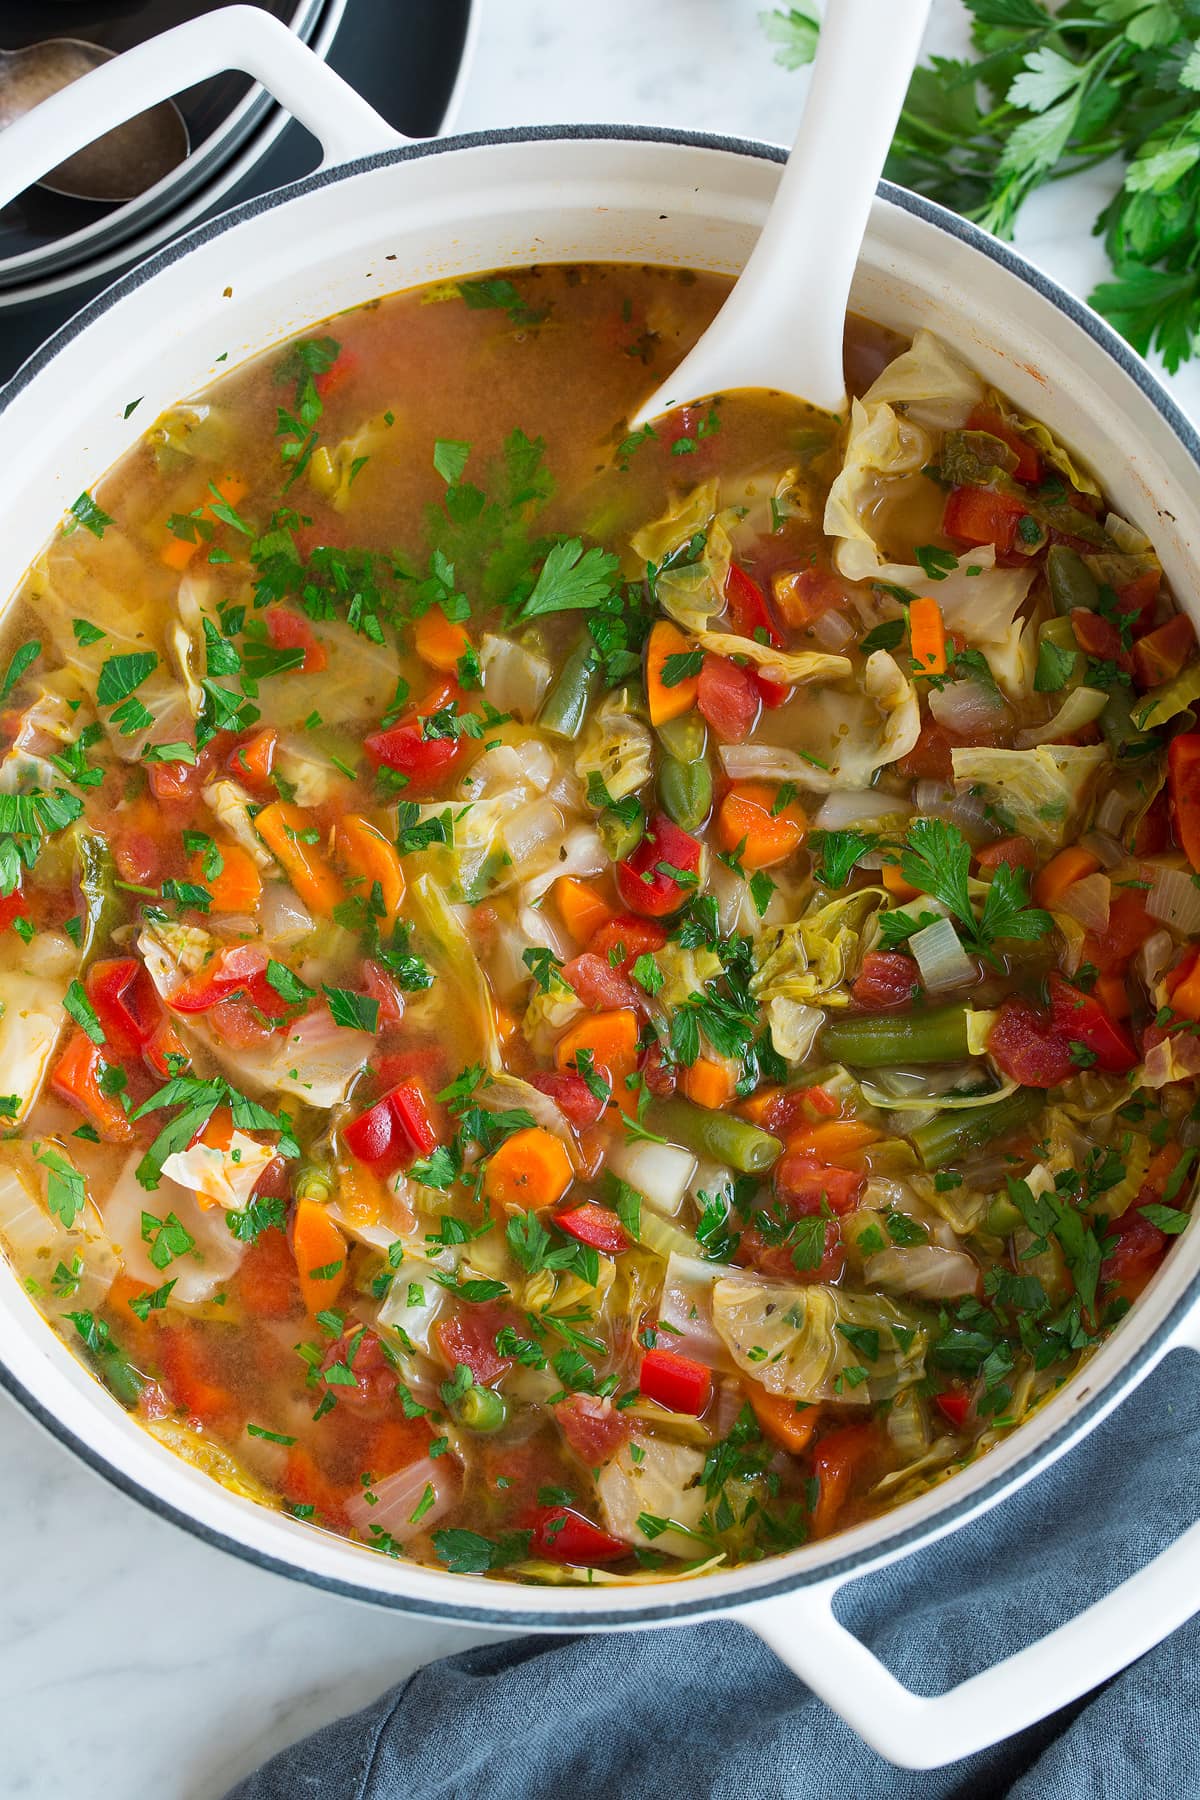 Overhead image of cabbage soup in a large white pot with a white ladle, showing an abundance of fresh vegetables.